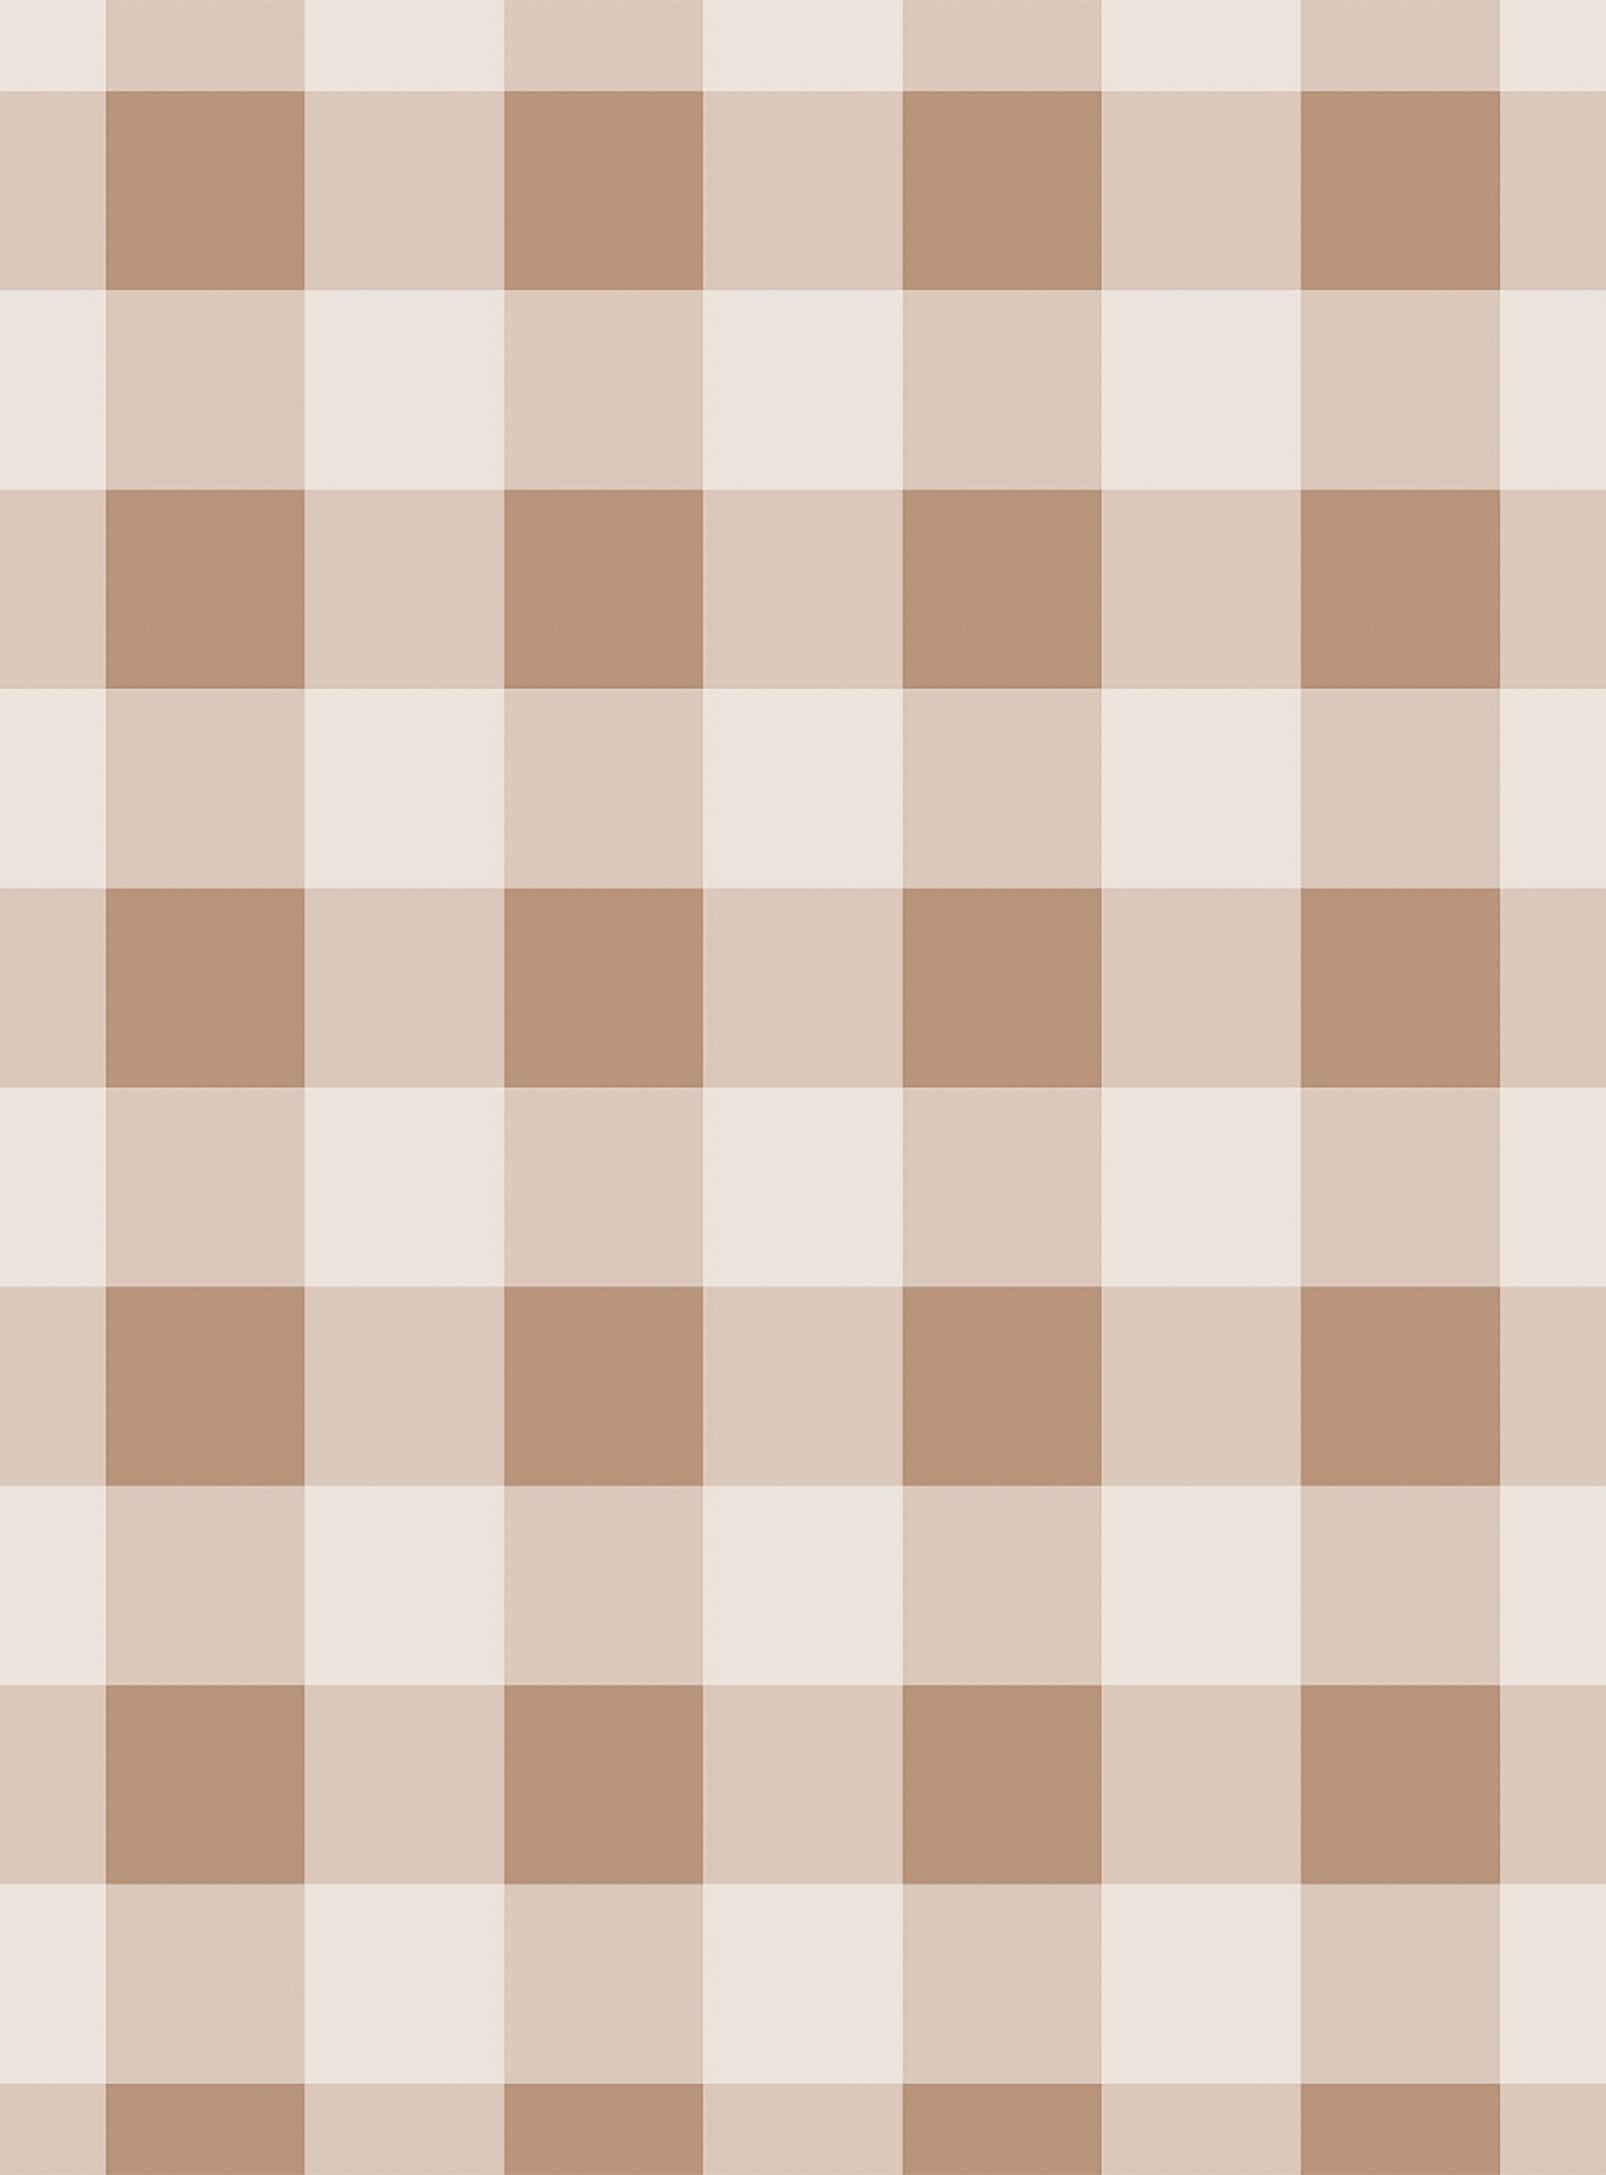 Station D Doubled Milan Checkered Wallpaper Strip See Available Sizes In Light Brown